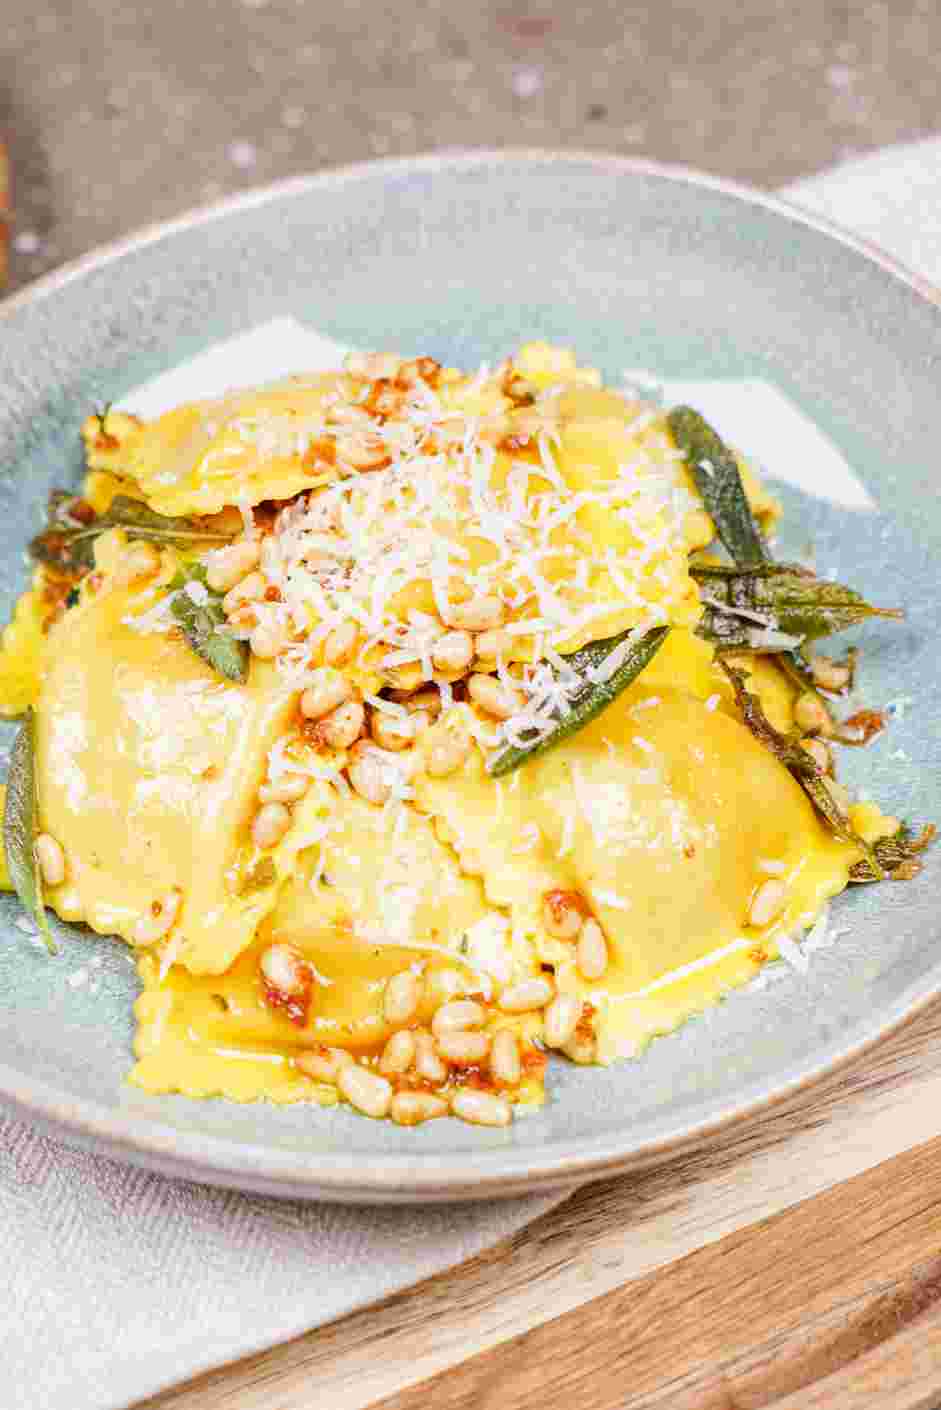 Butternut Squash Ravioli Sauce Recipe: Plate the pasta and top with more Parmesan cheese if desired.